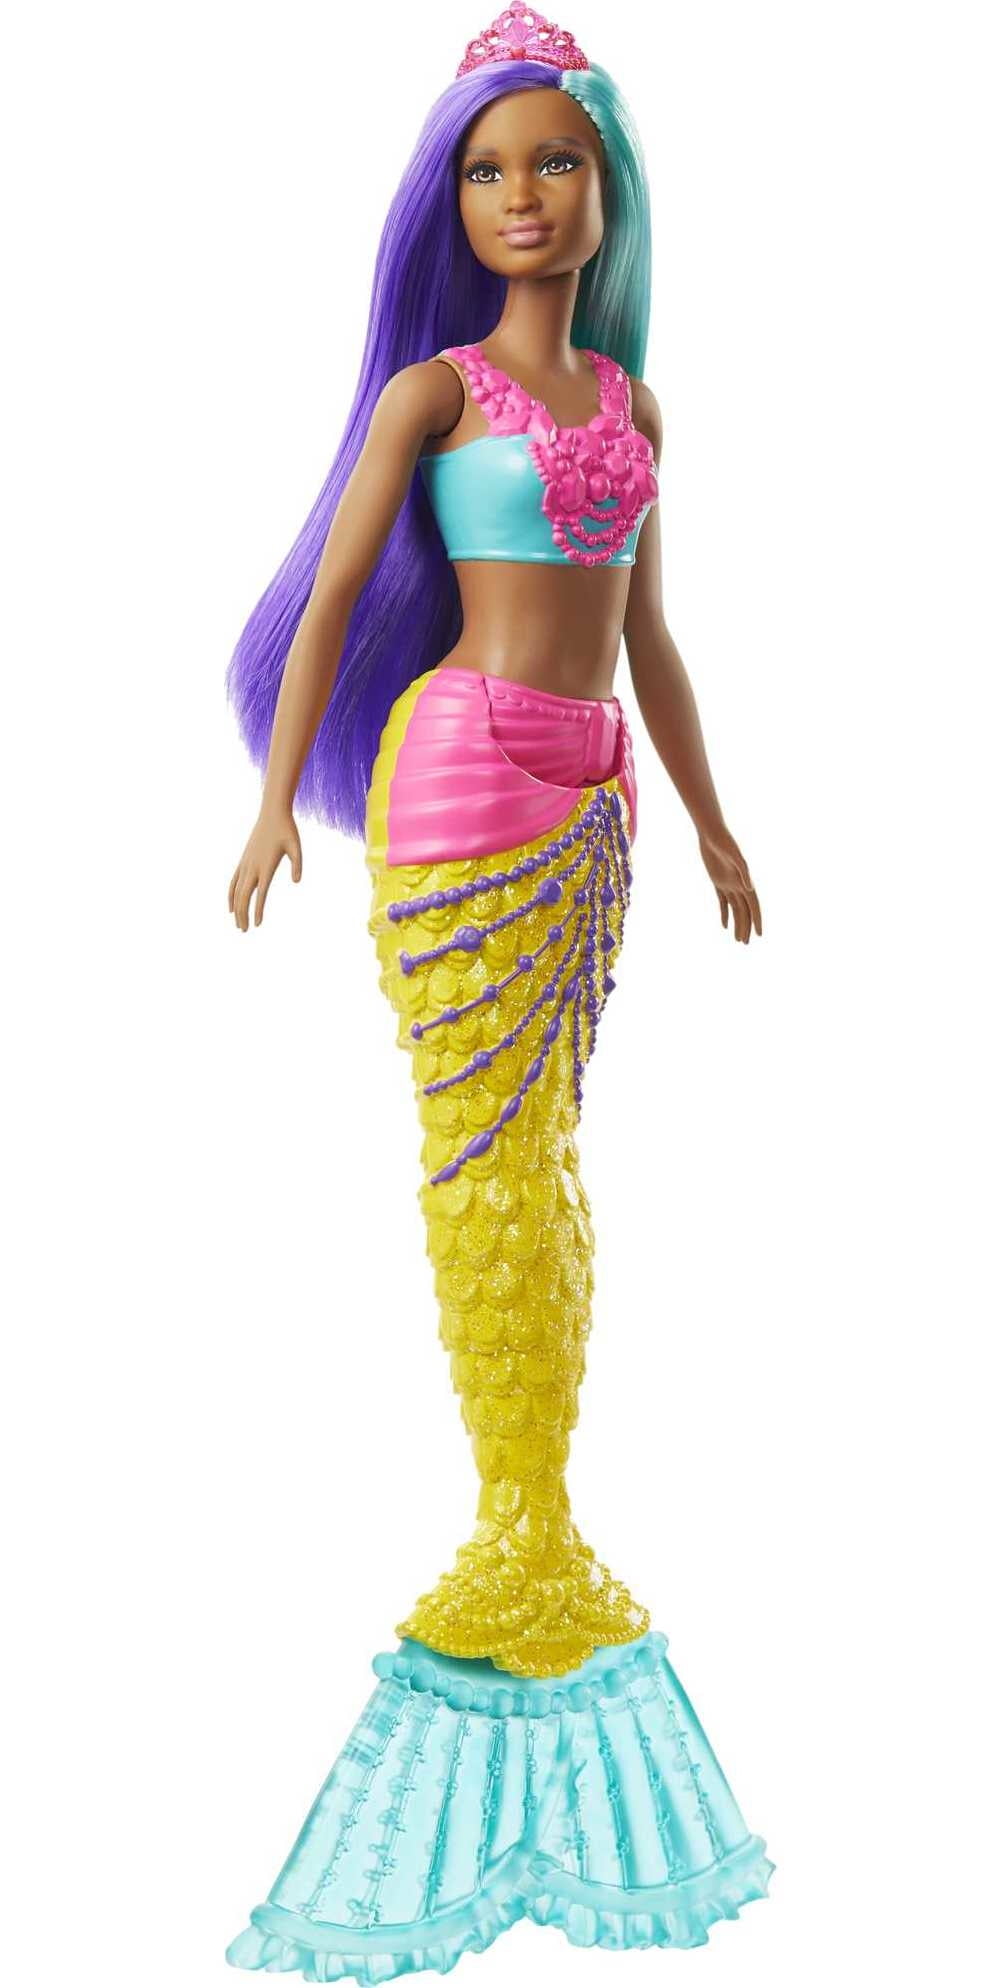 Buy Barbie Dreamtopia Mermaid Doll With Teal And Purple Hair Yellow Tail And Tiara Accessory Online